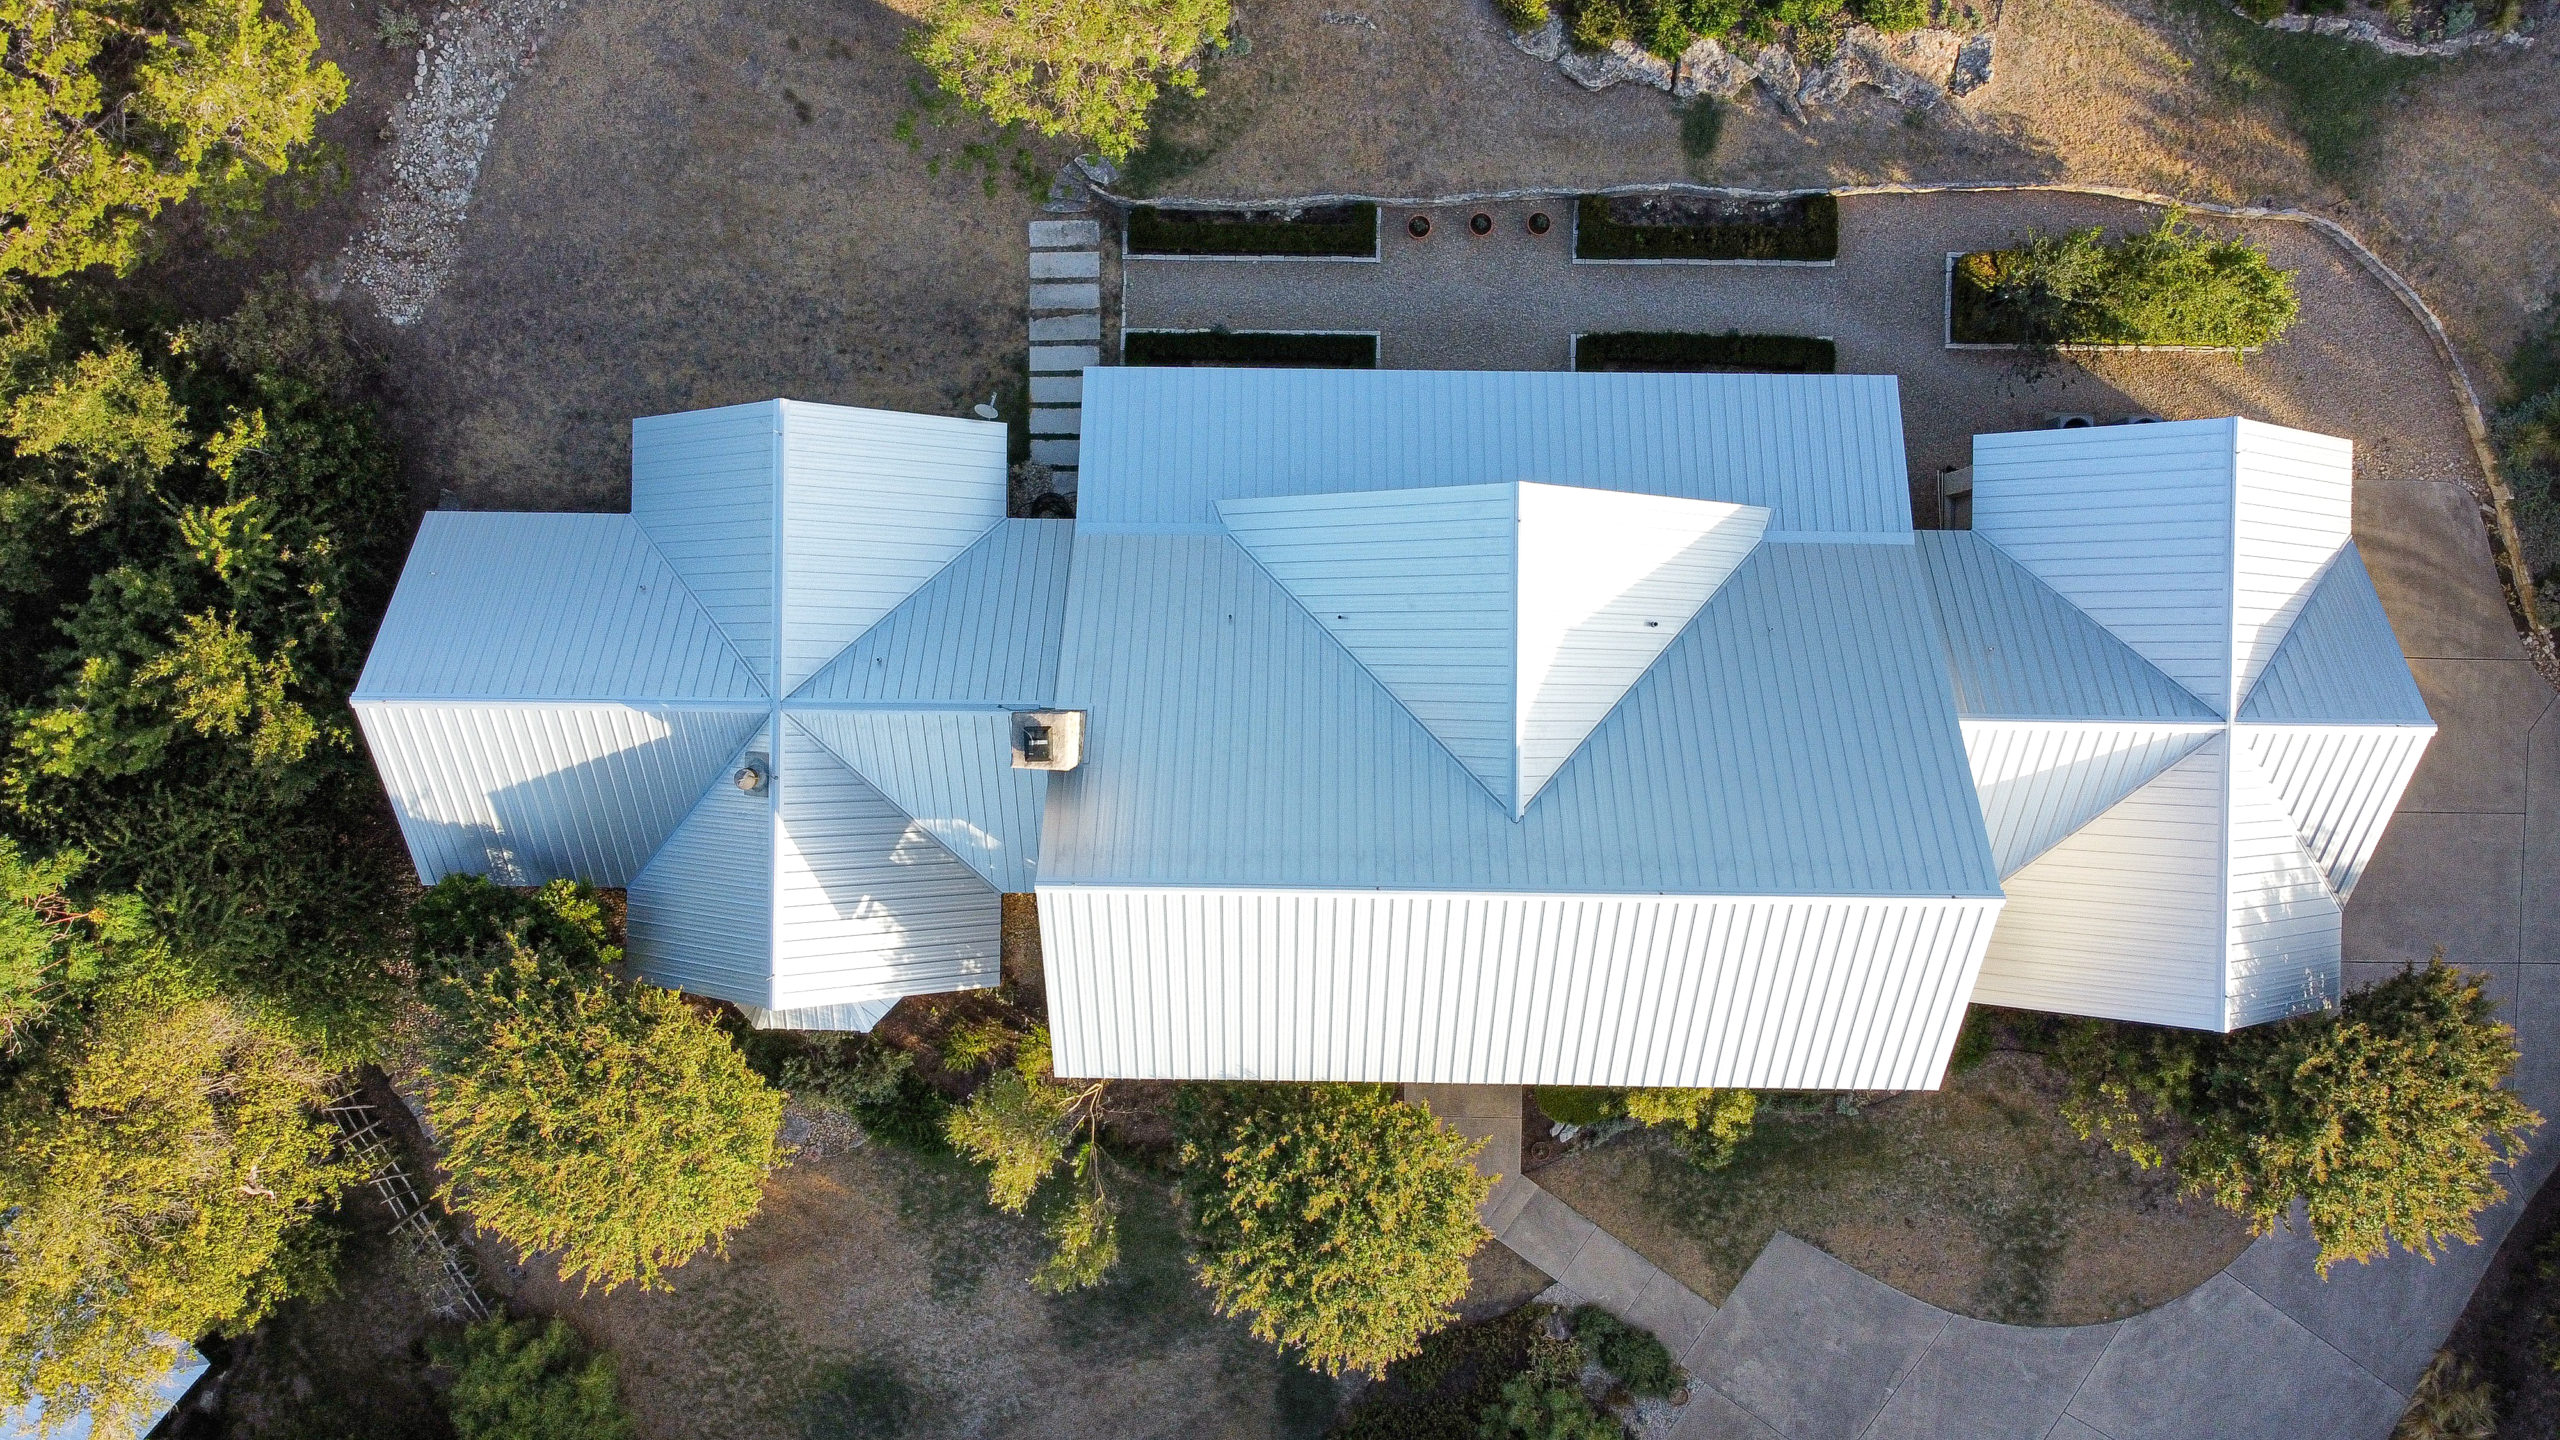 24 ga. Standing Seam Metal Roof in Galvalume by Whitish Roofing Central Texas Roofing Company